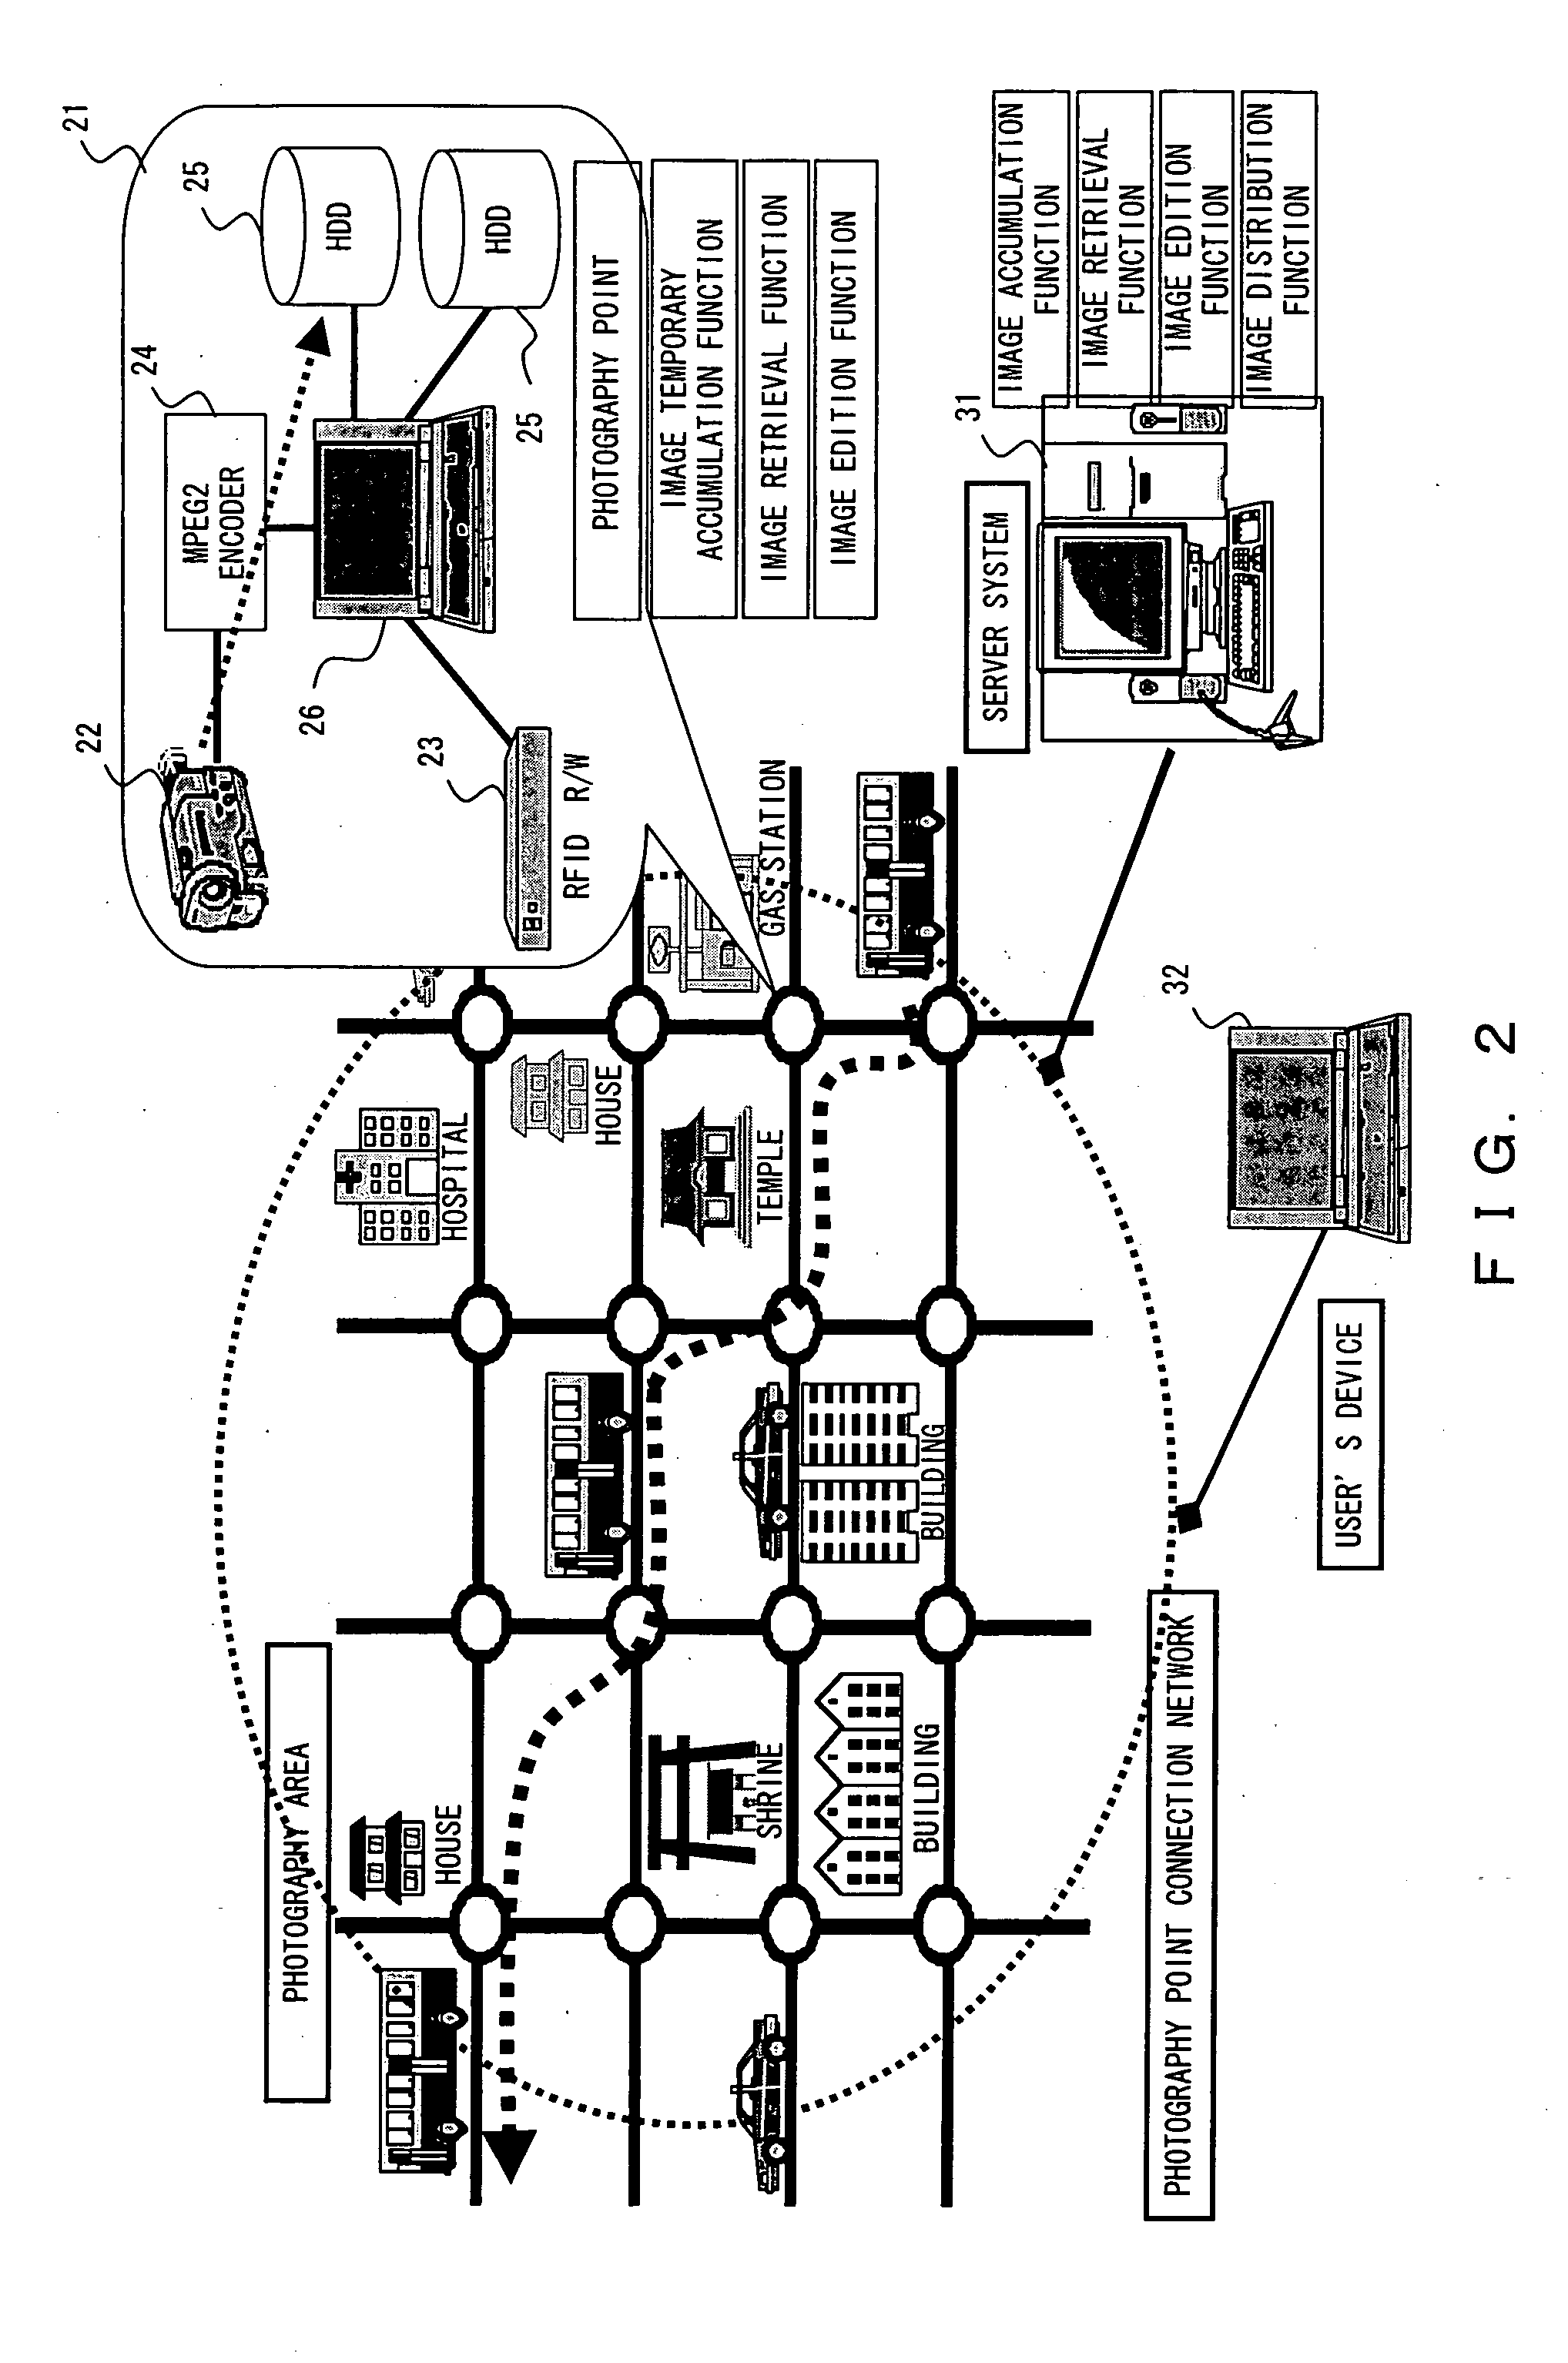 Method of retrieving image data of a moving object, apparatus for photographing and detecting a moving object, and apparatus for retrieving image data of a moving object